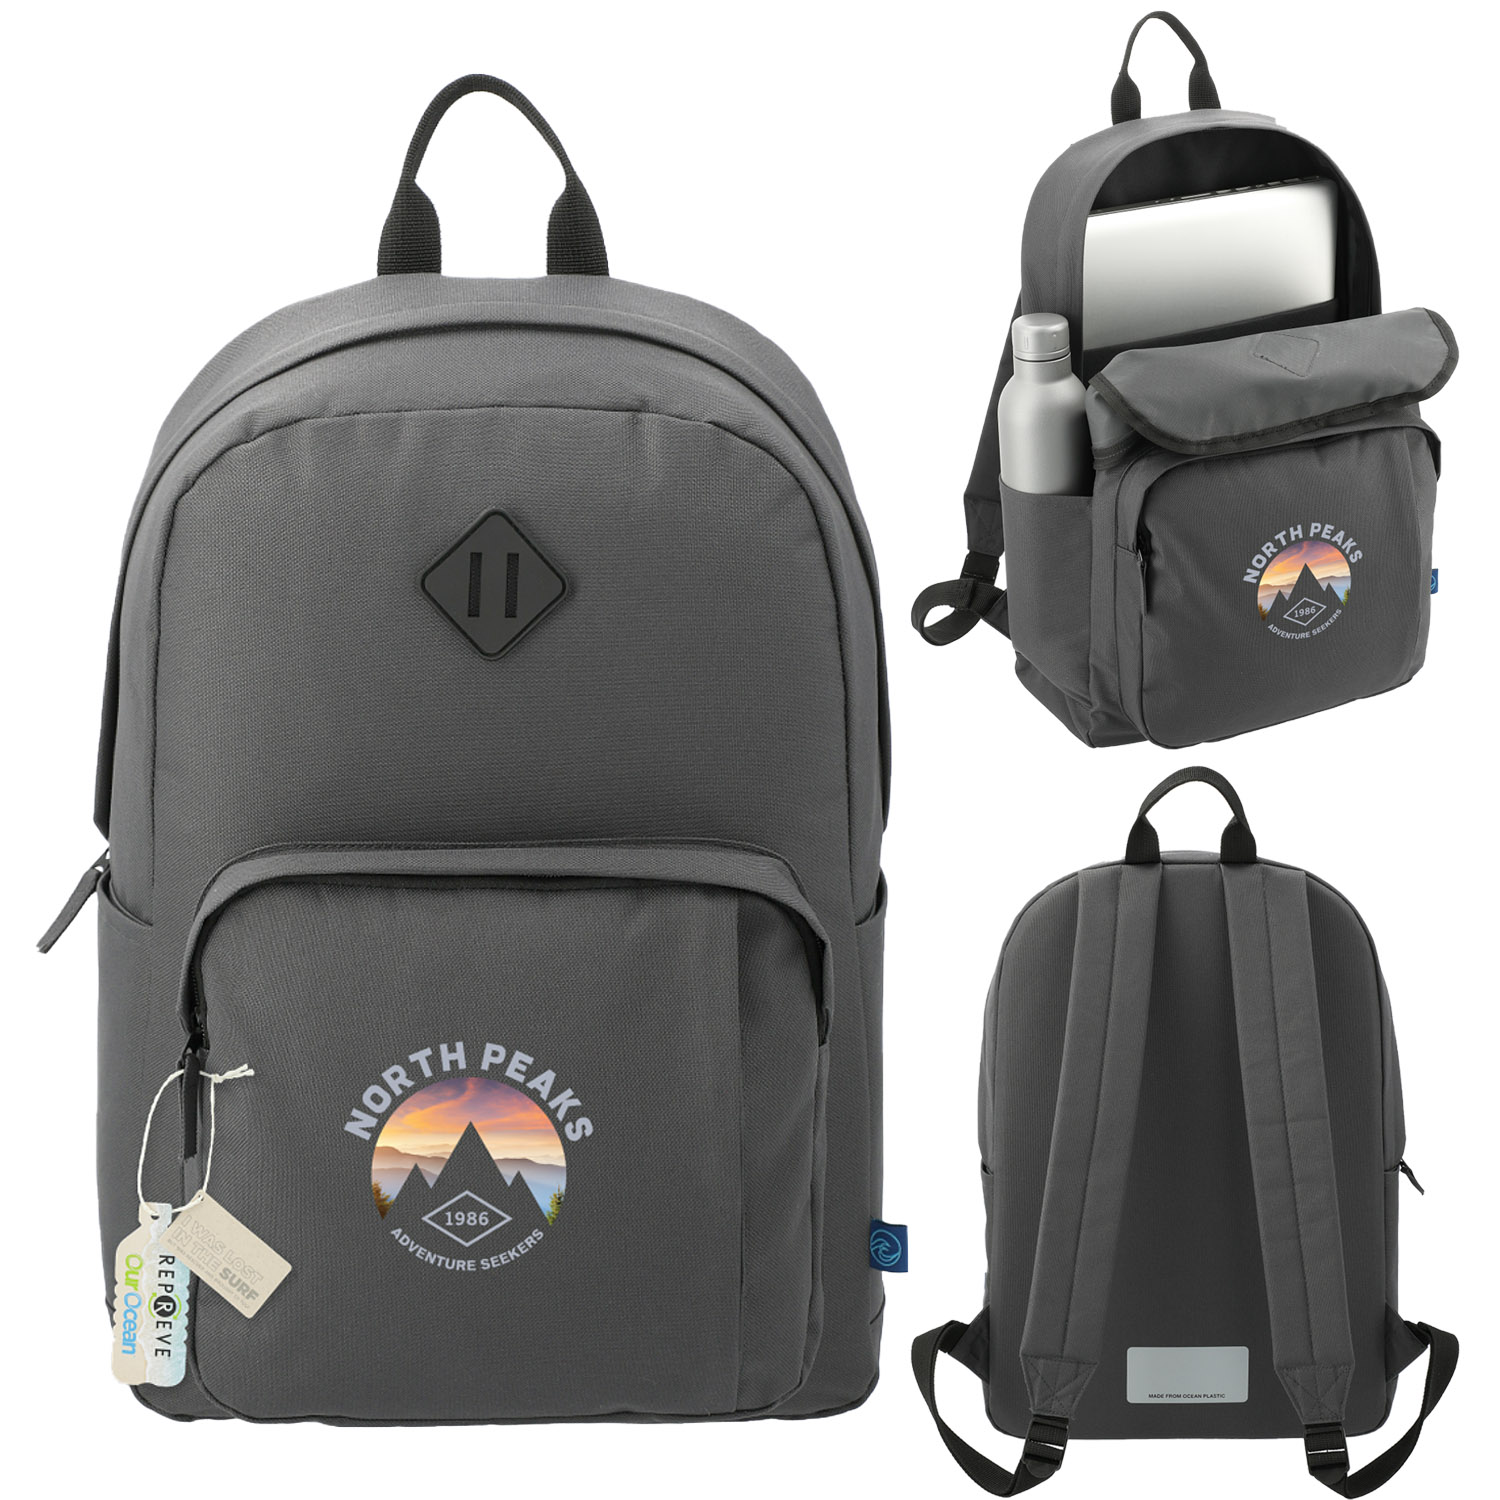 company swag dark gray backpack for tech accessories